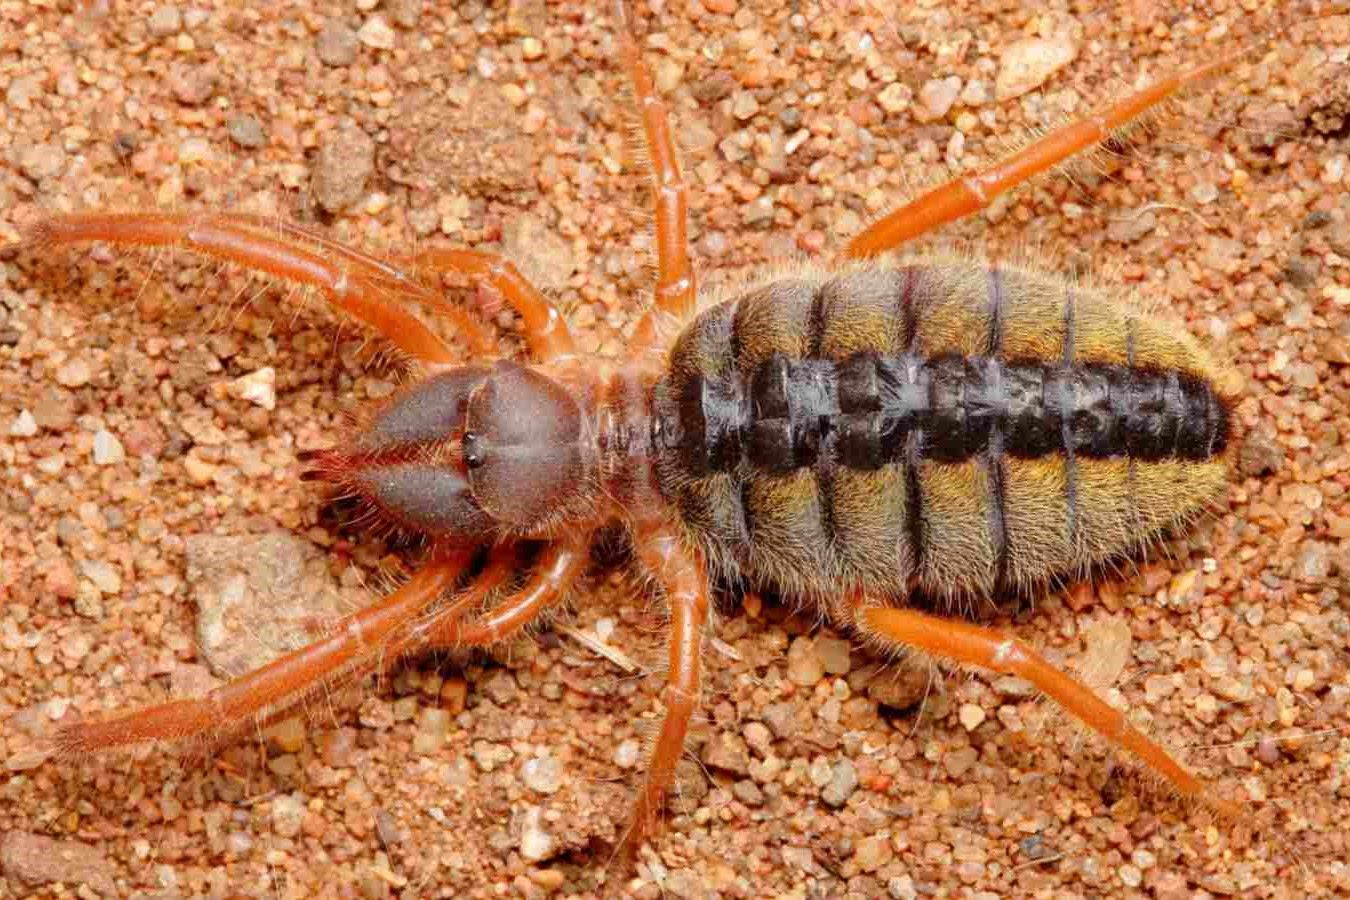 Shocking Encounter: Camel Spider’s Deadly Encounter With A Dog